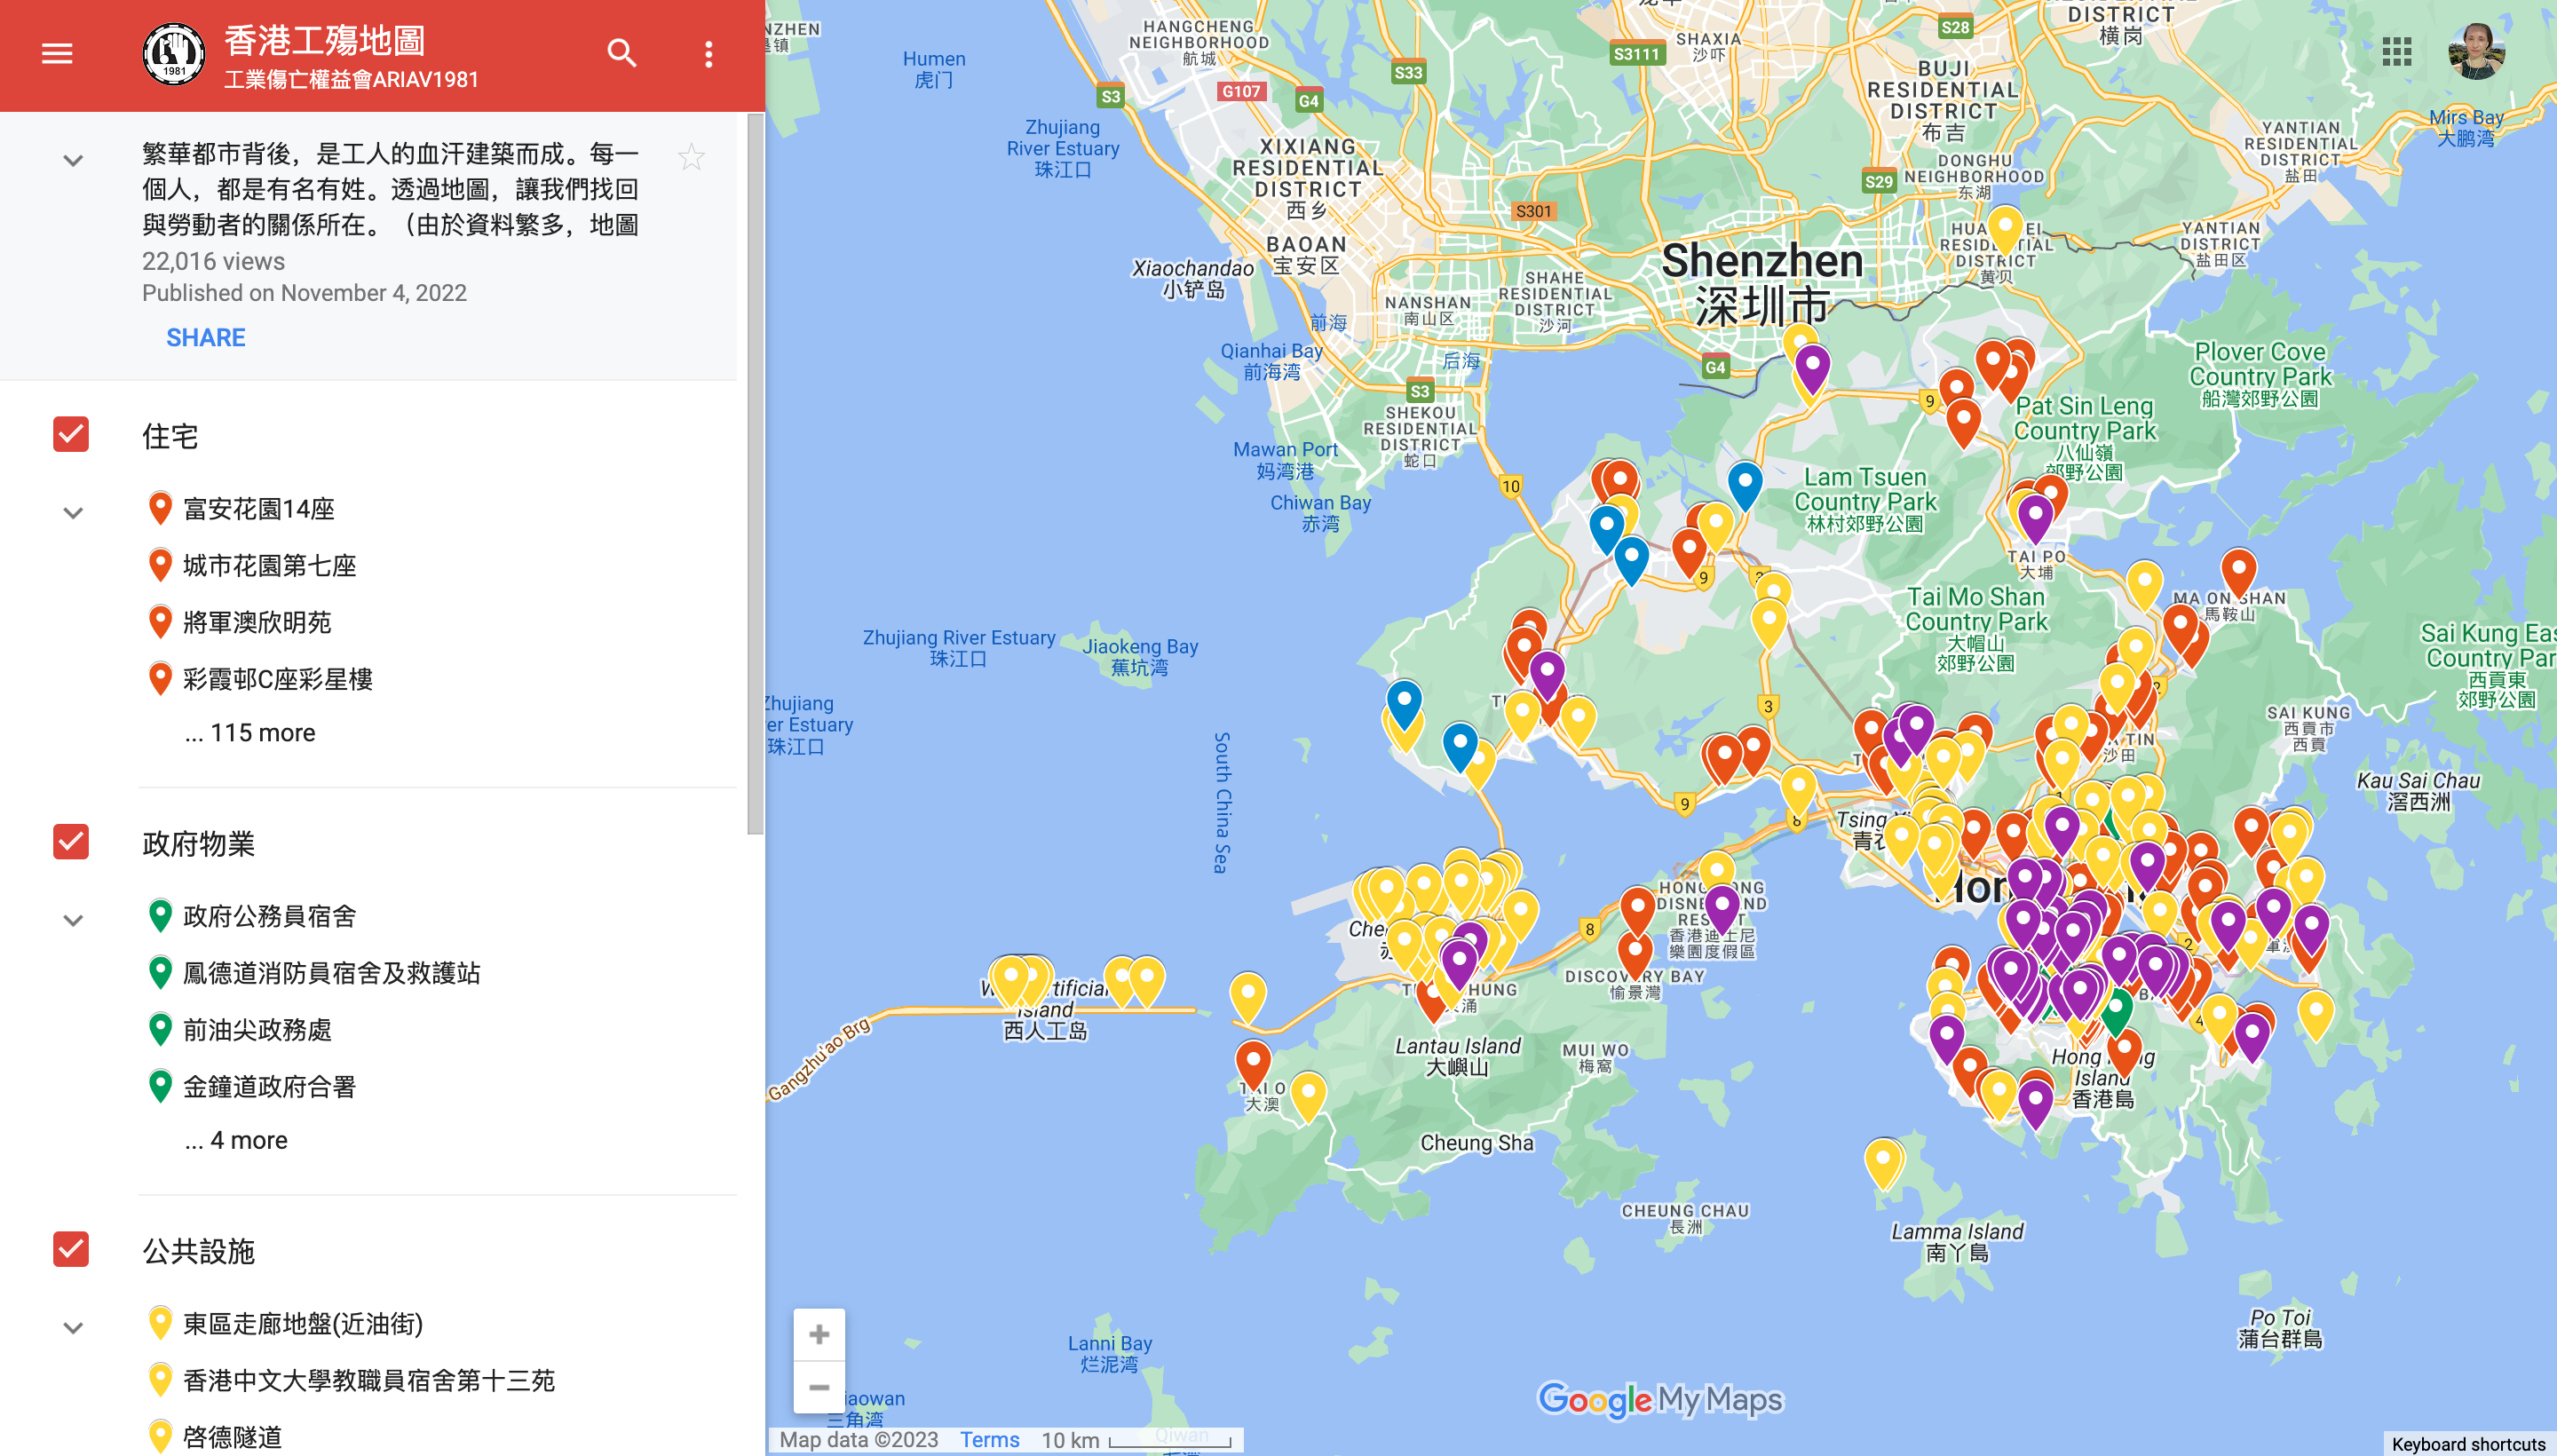 ARIAV created a Google Map of all the fatal accidents in Hong Kong over the past 35 years